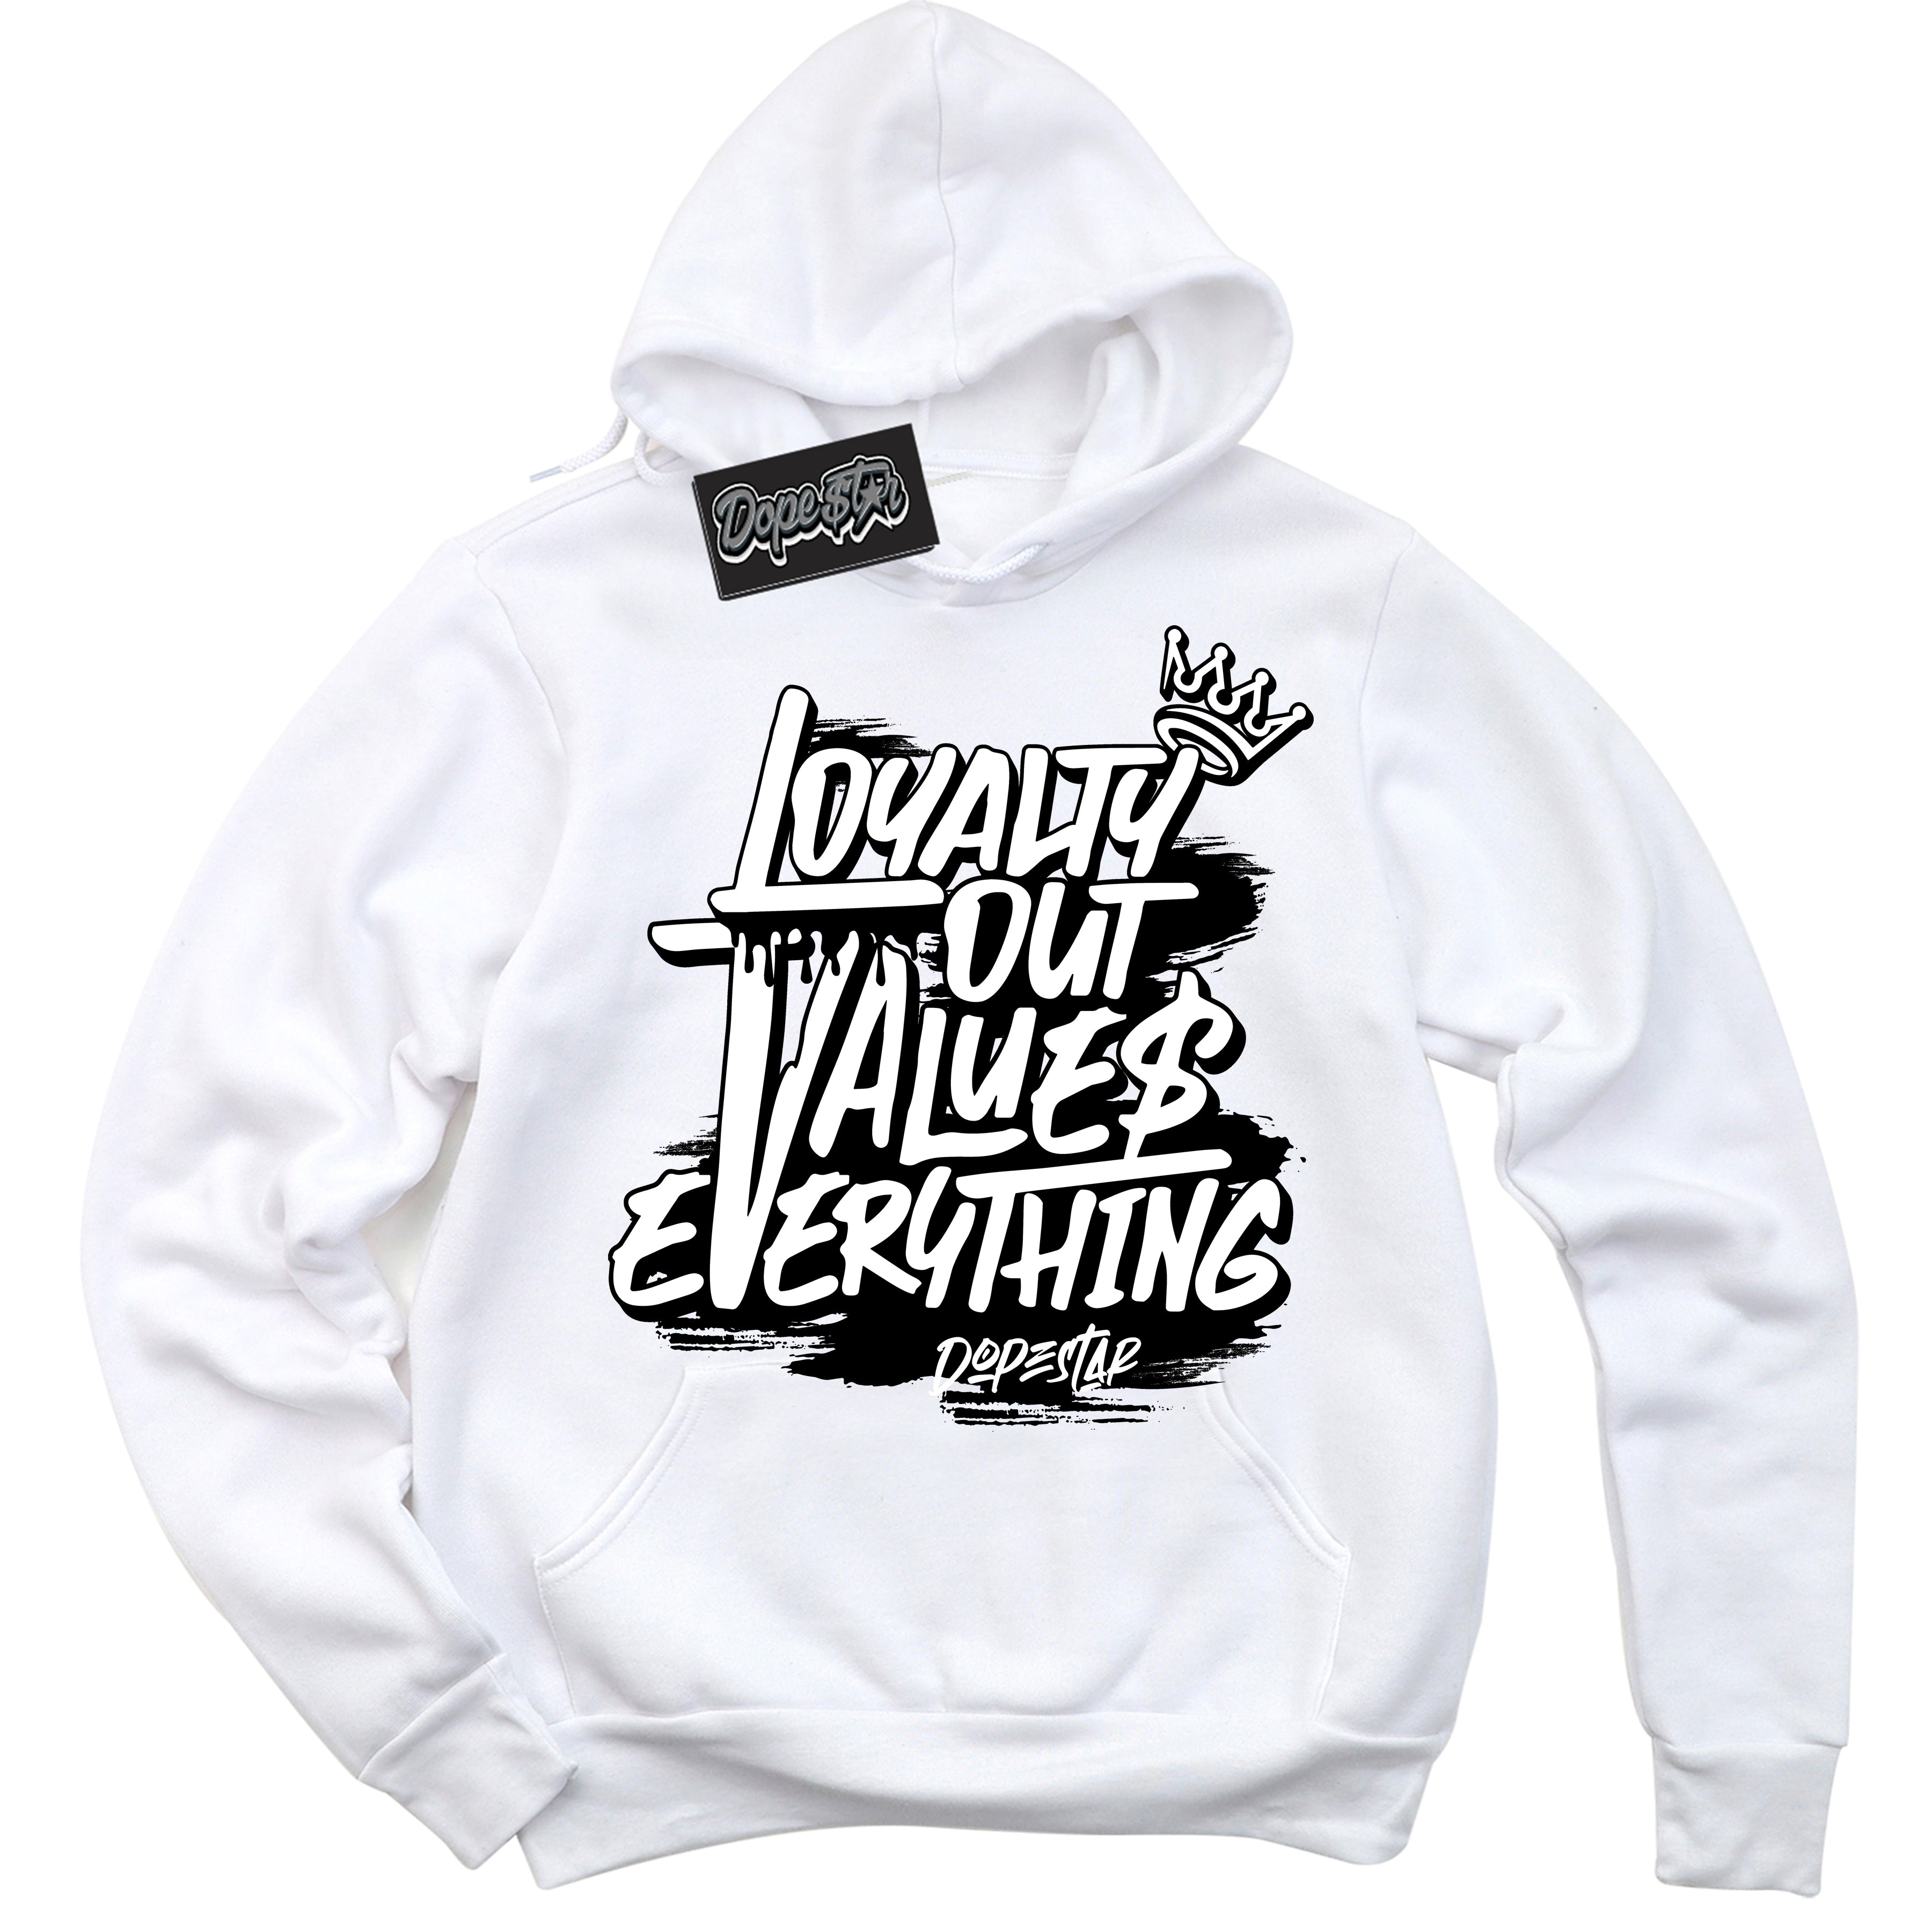 Cool White Hoodie with “ Loyalty Out Values Everything ”  design that Perfectly Matches SP Travis Scott Black Phantom 1s Sneakers.